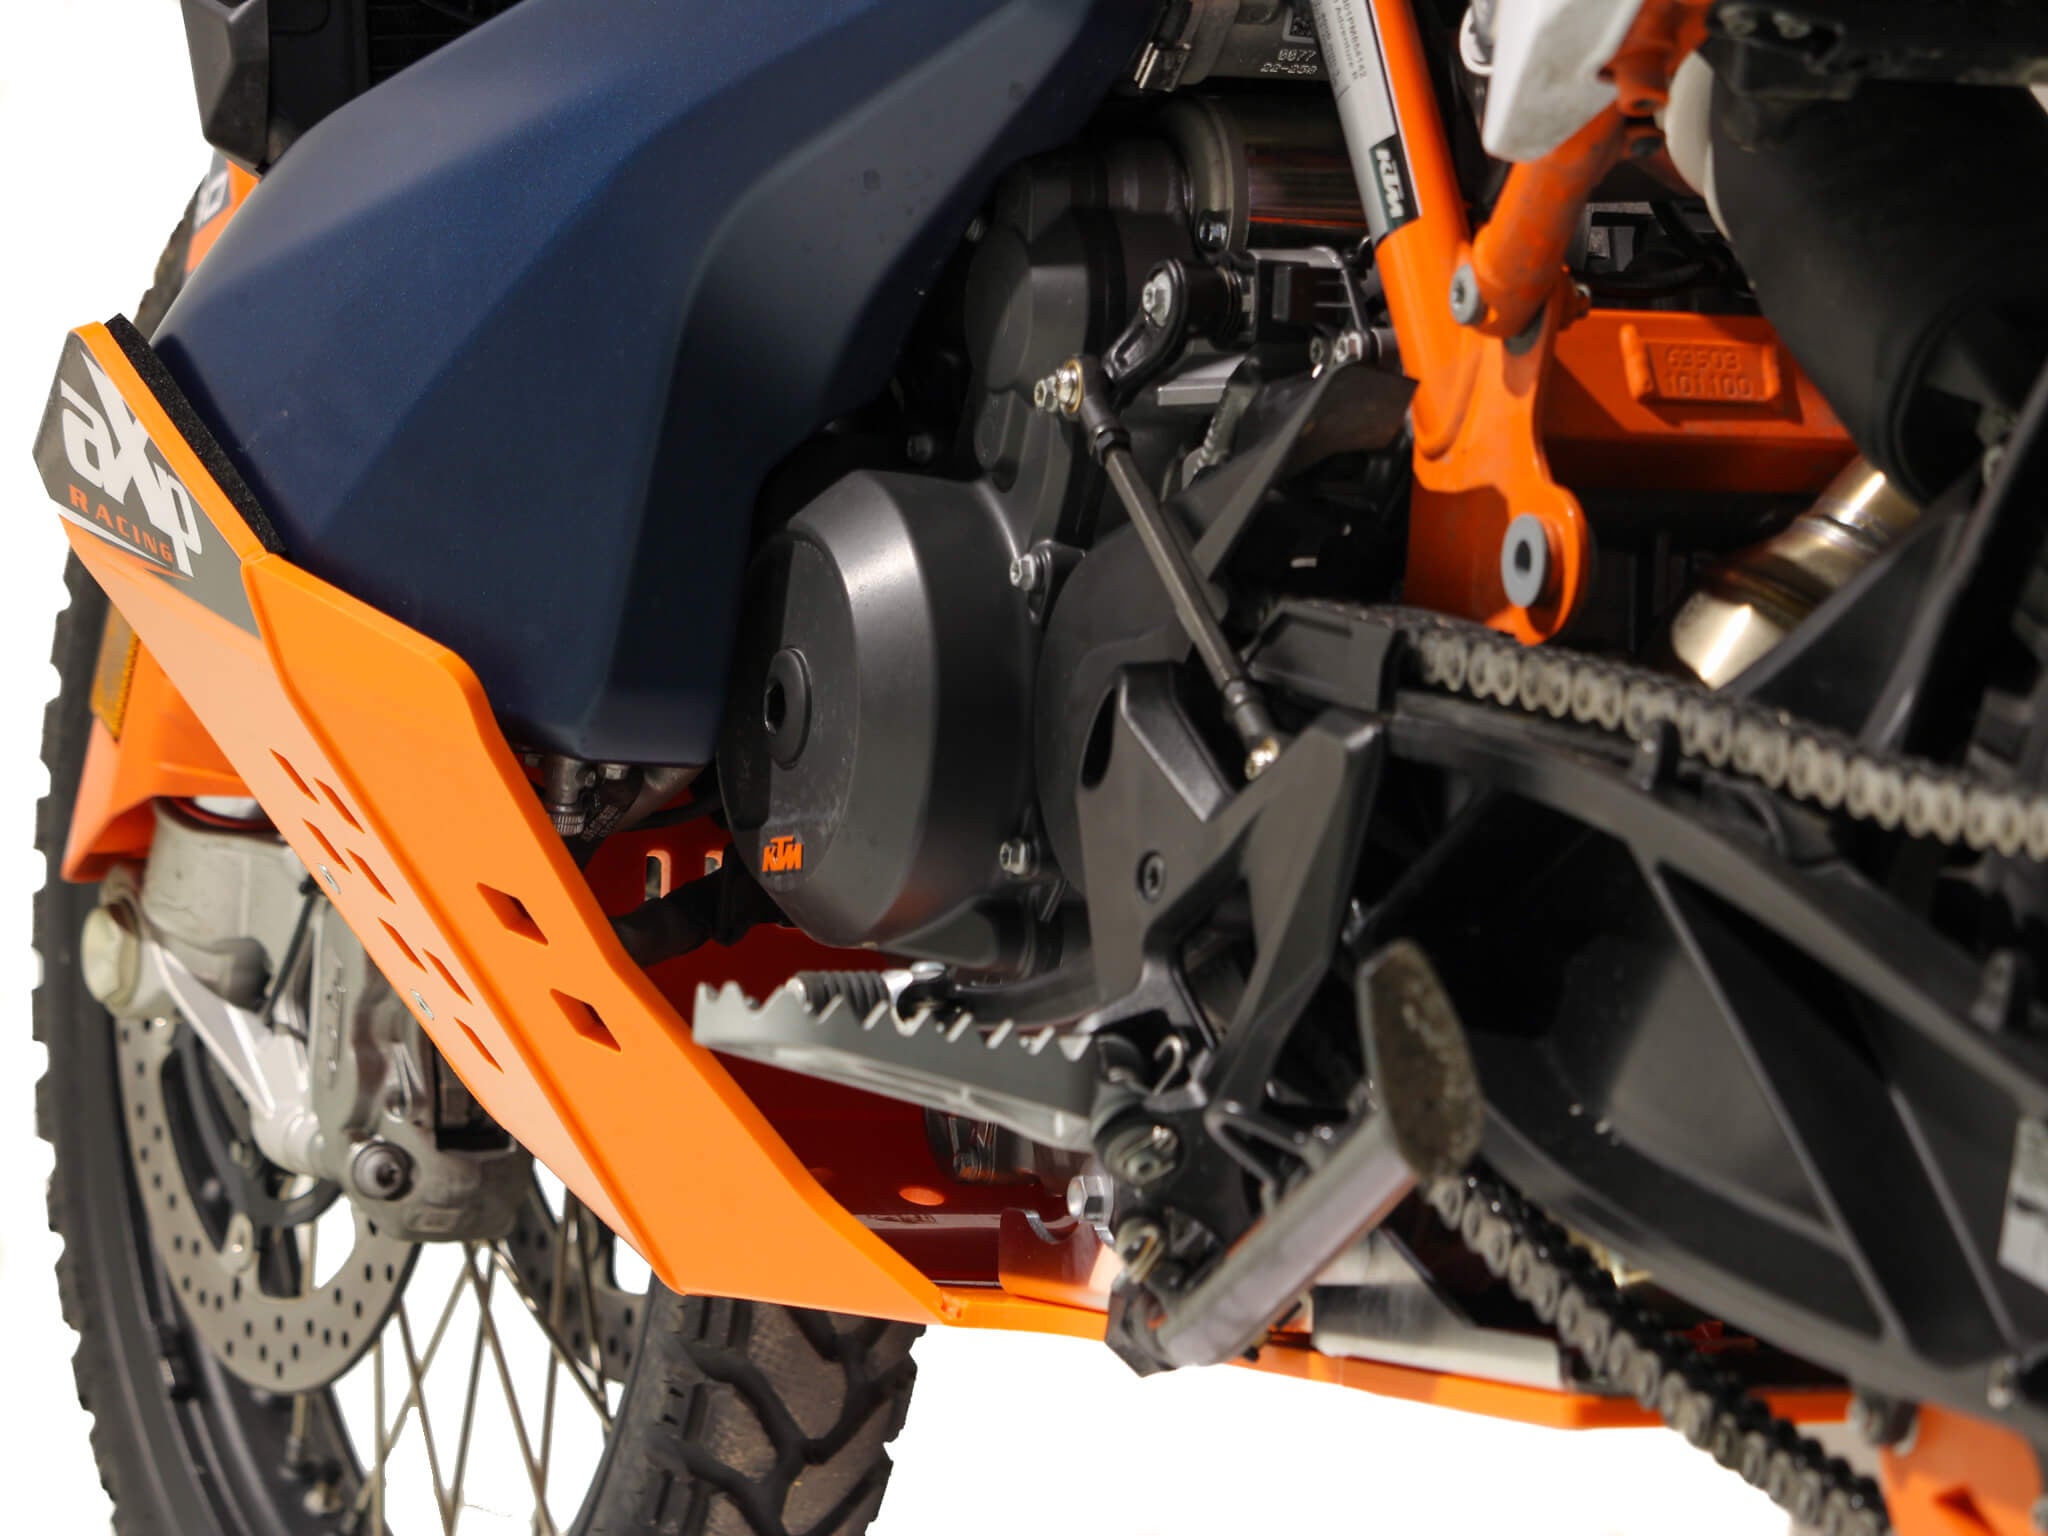 AXP - Skid Plate - GEN 2 - KTM 790/890 Adventure (including R and Rally)